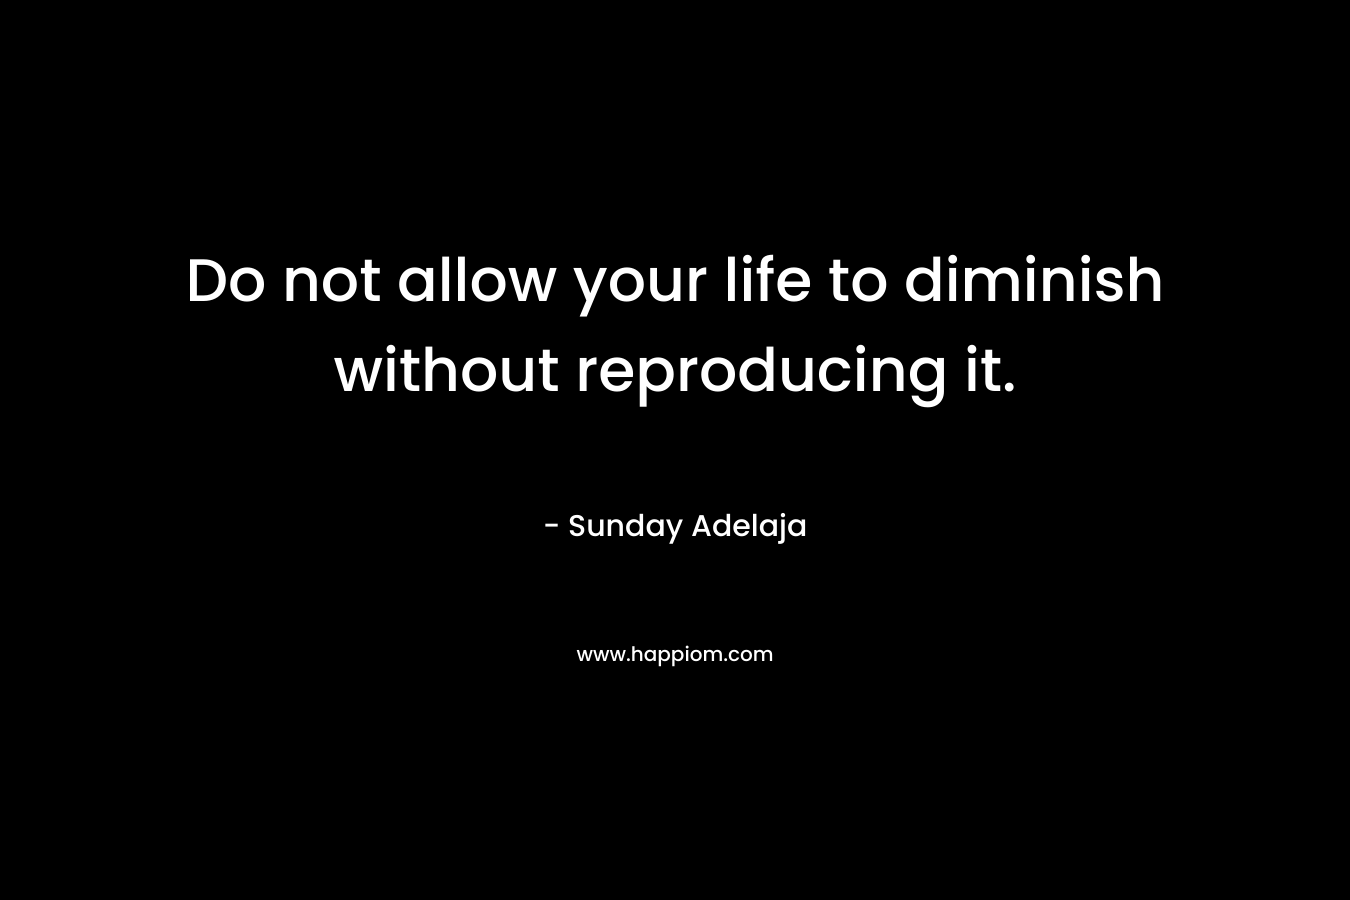 Do not allow your life to diminish without reproducing it.